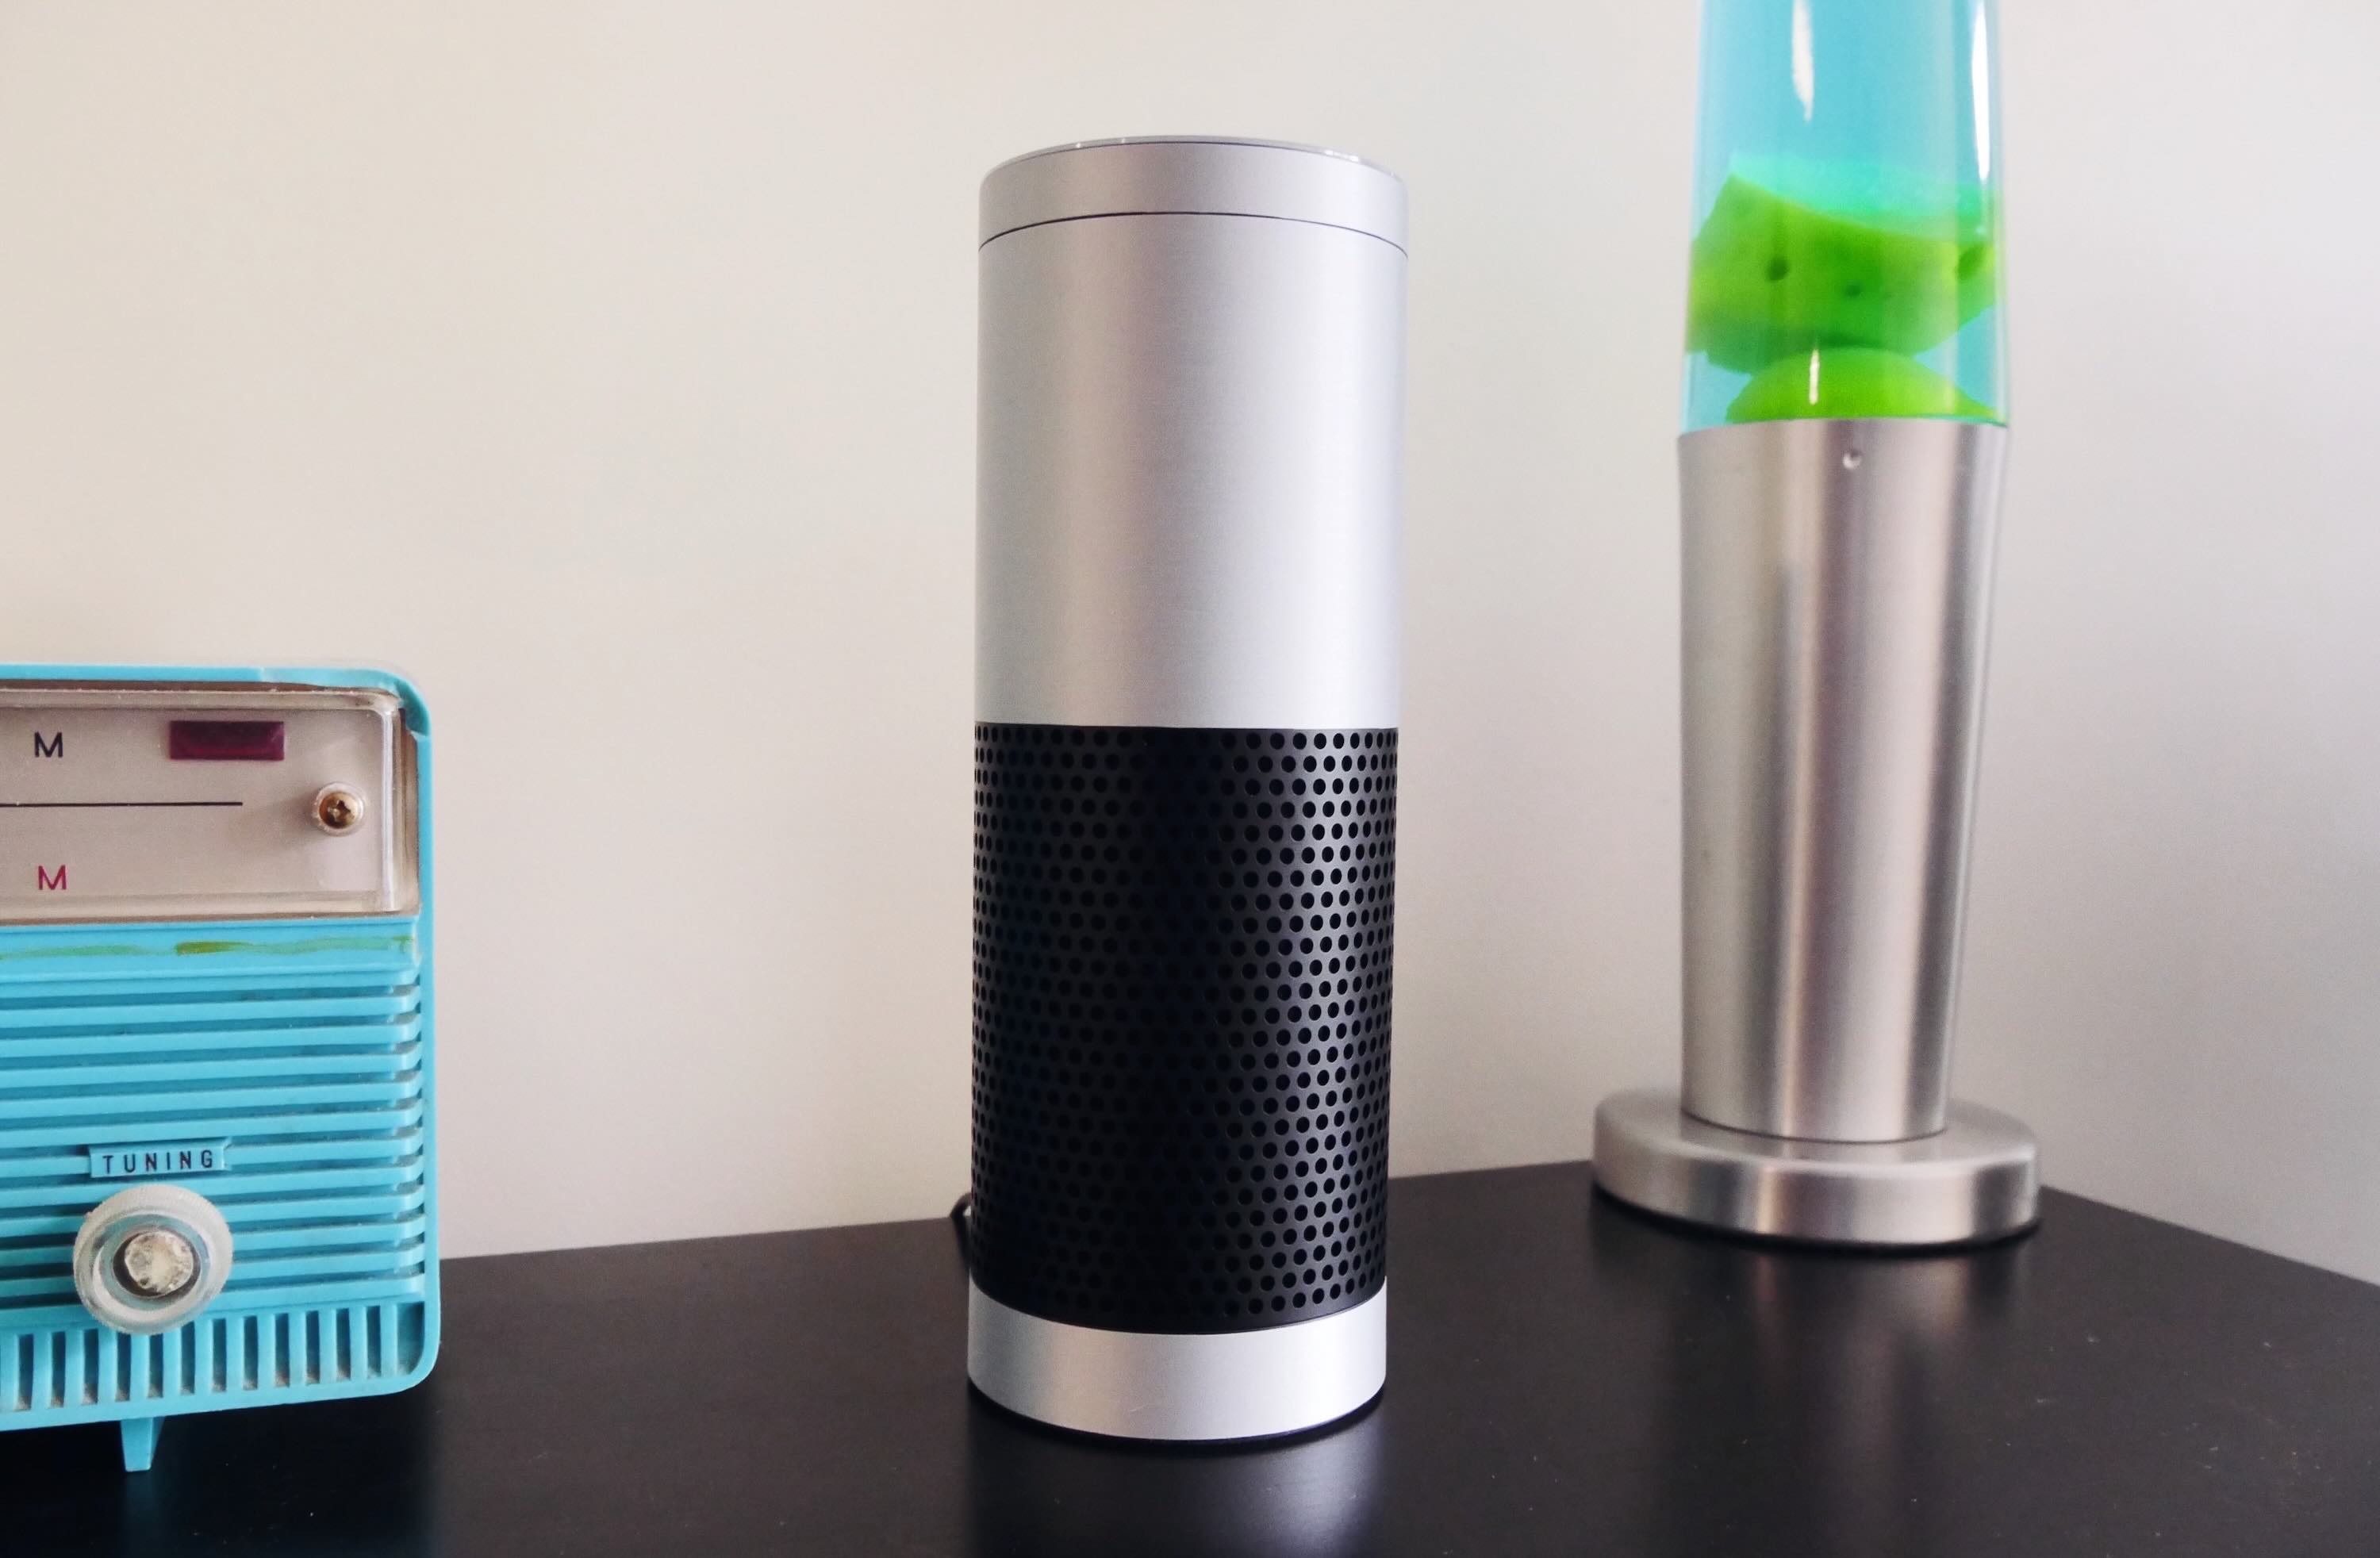 How To Enable A Skill On Alexa